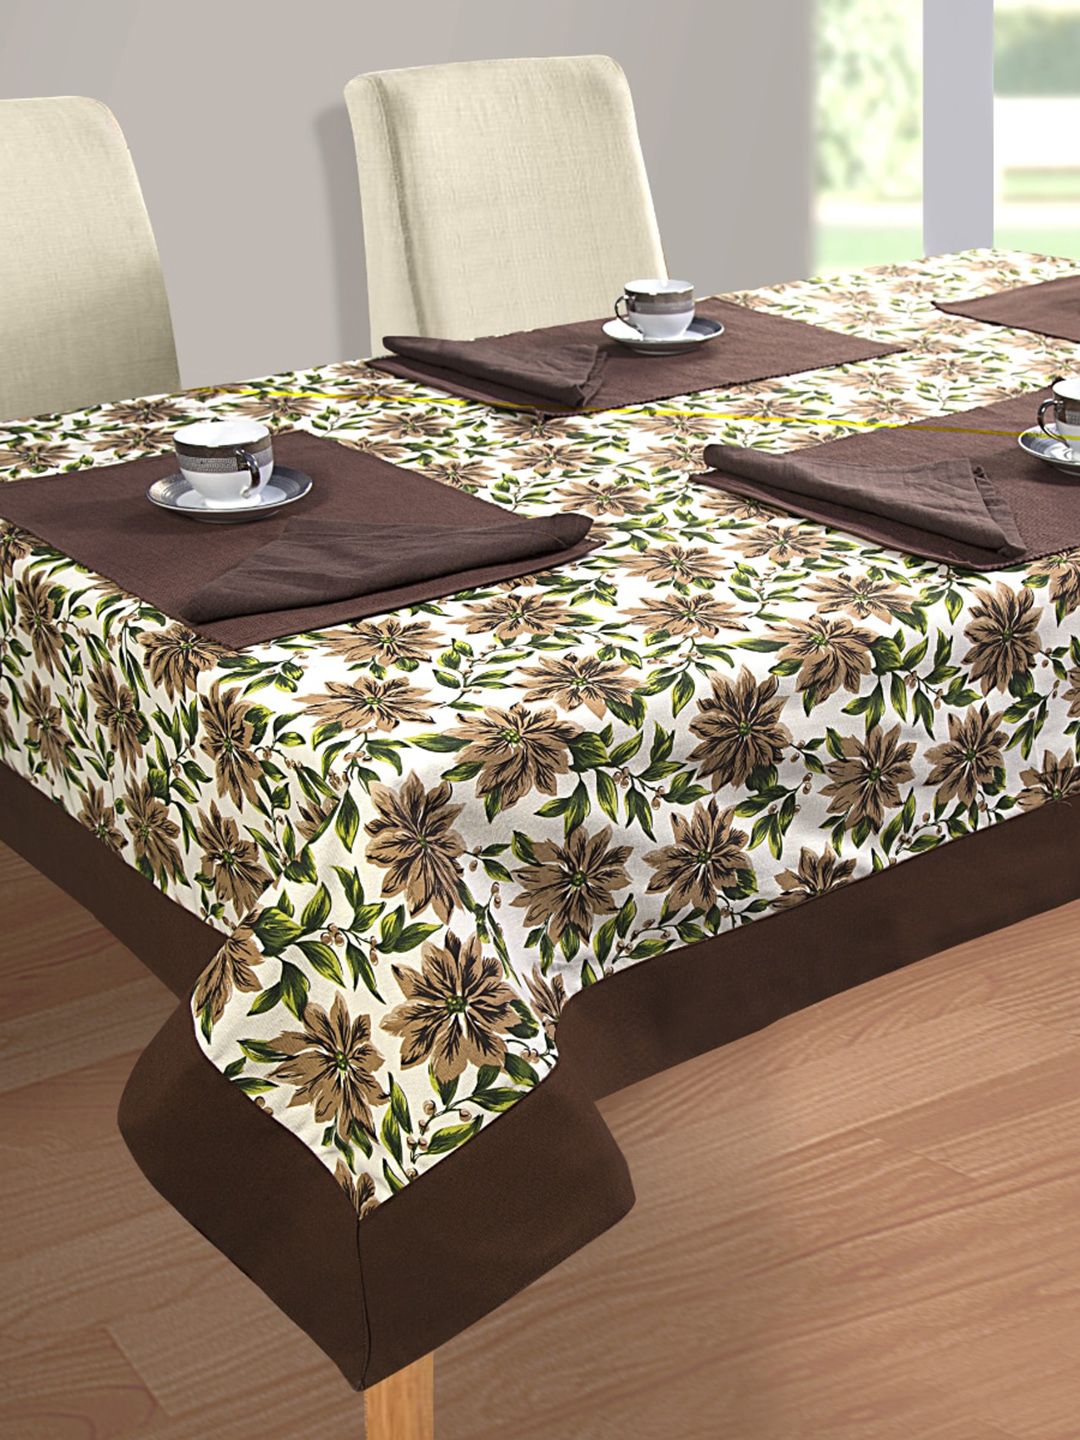 SHADES of LIFE 6-Seater Coffee Brown & White Printed 6-Seater Rectangle Cotton Table Cover Price in India